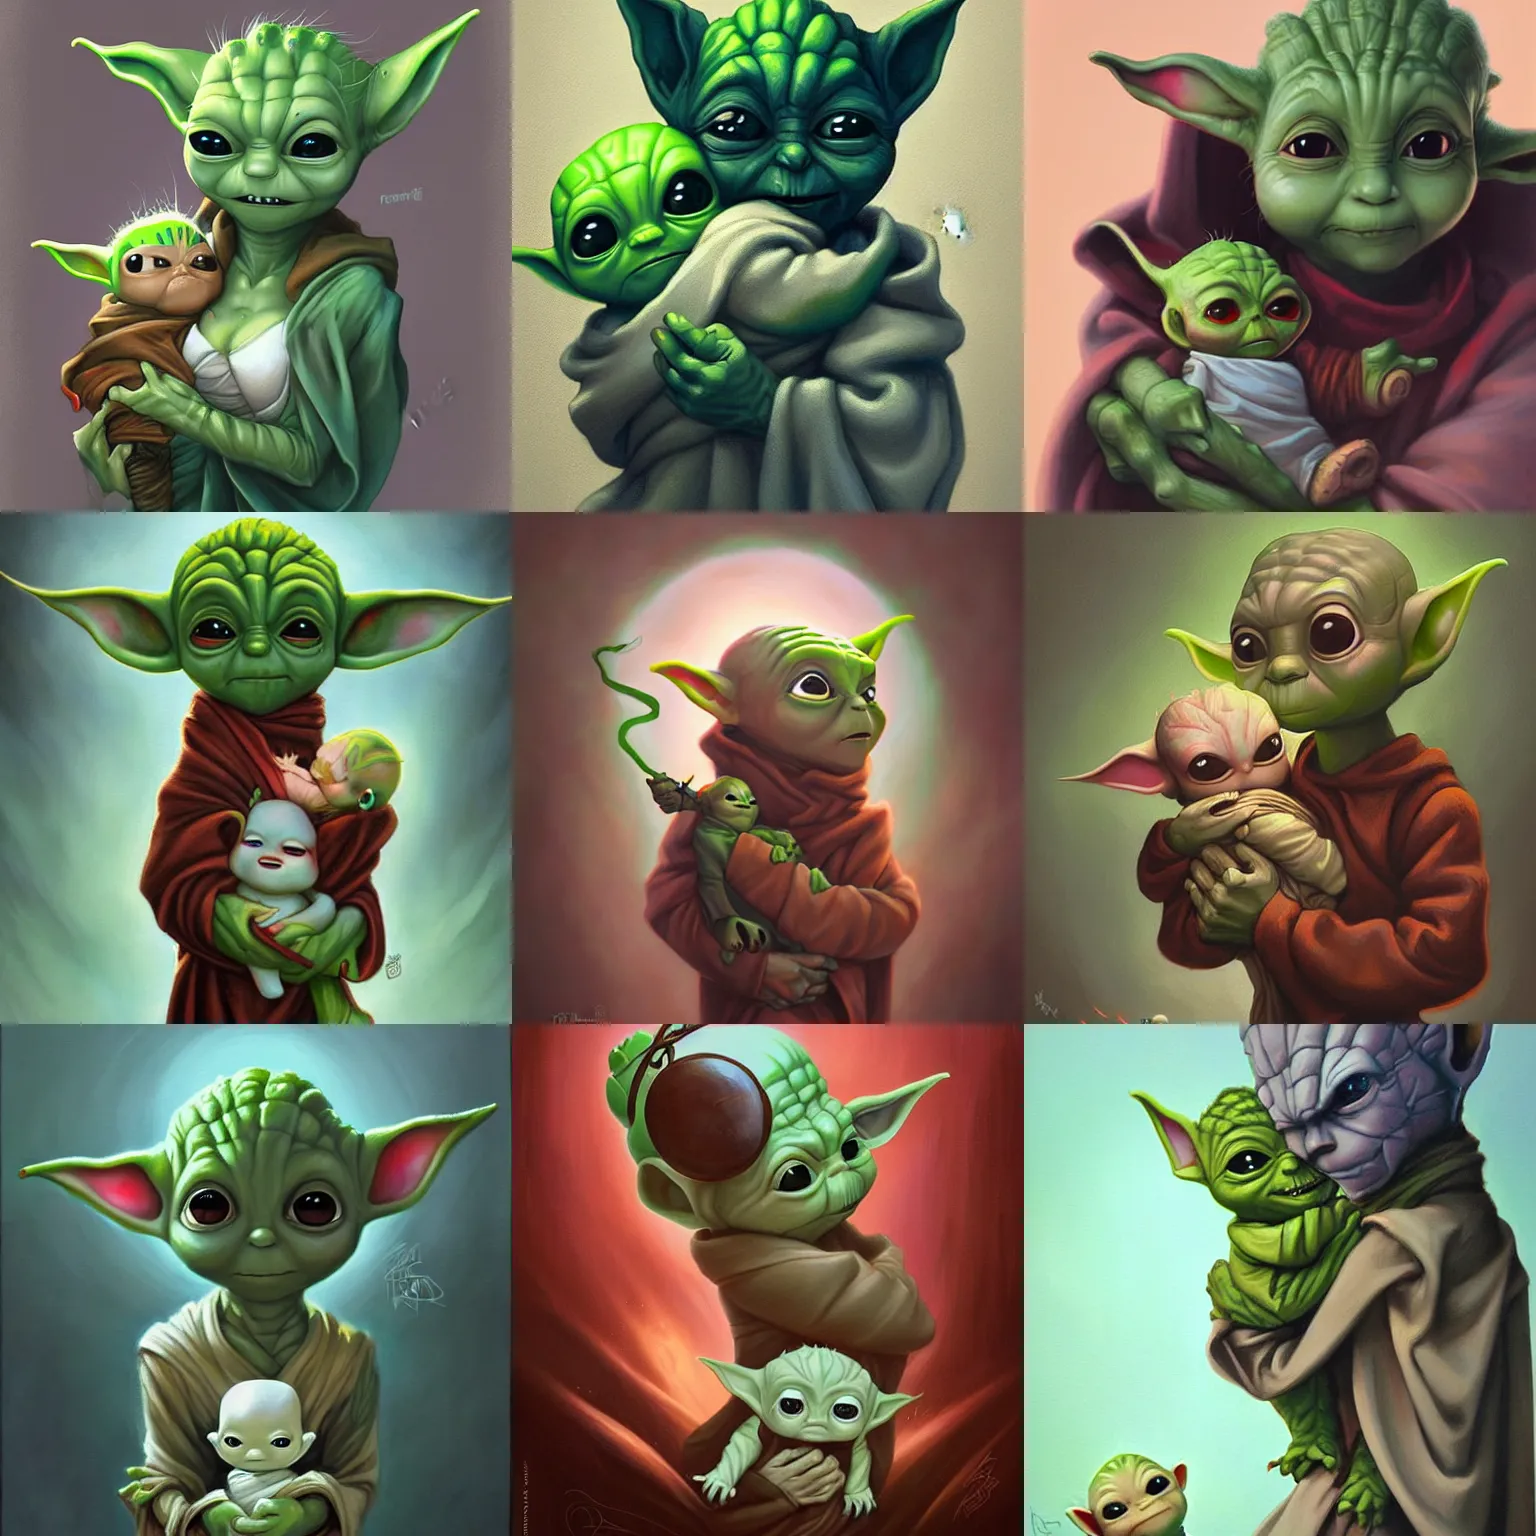 Prompt: baby yoda holding baby groot in his arms by peter mohrbacher